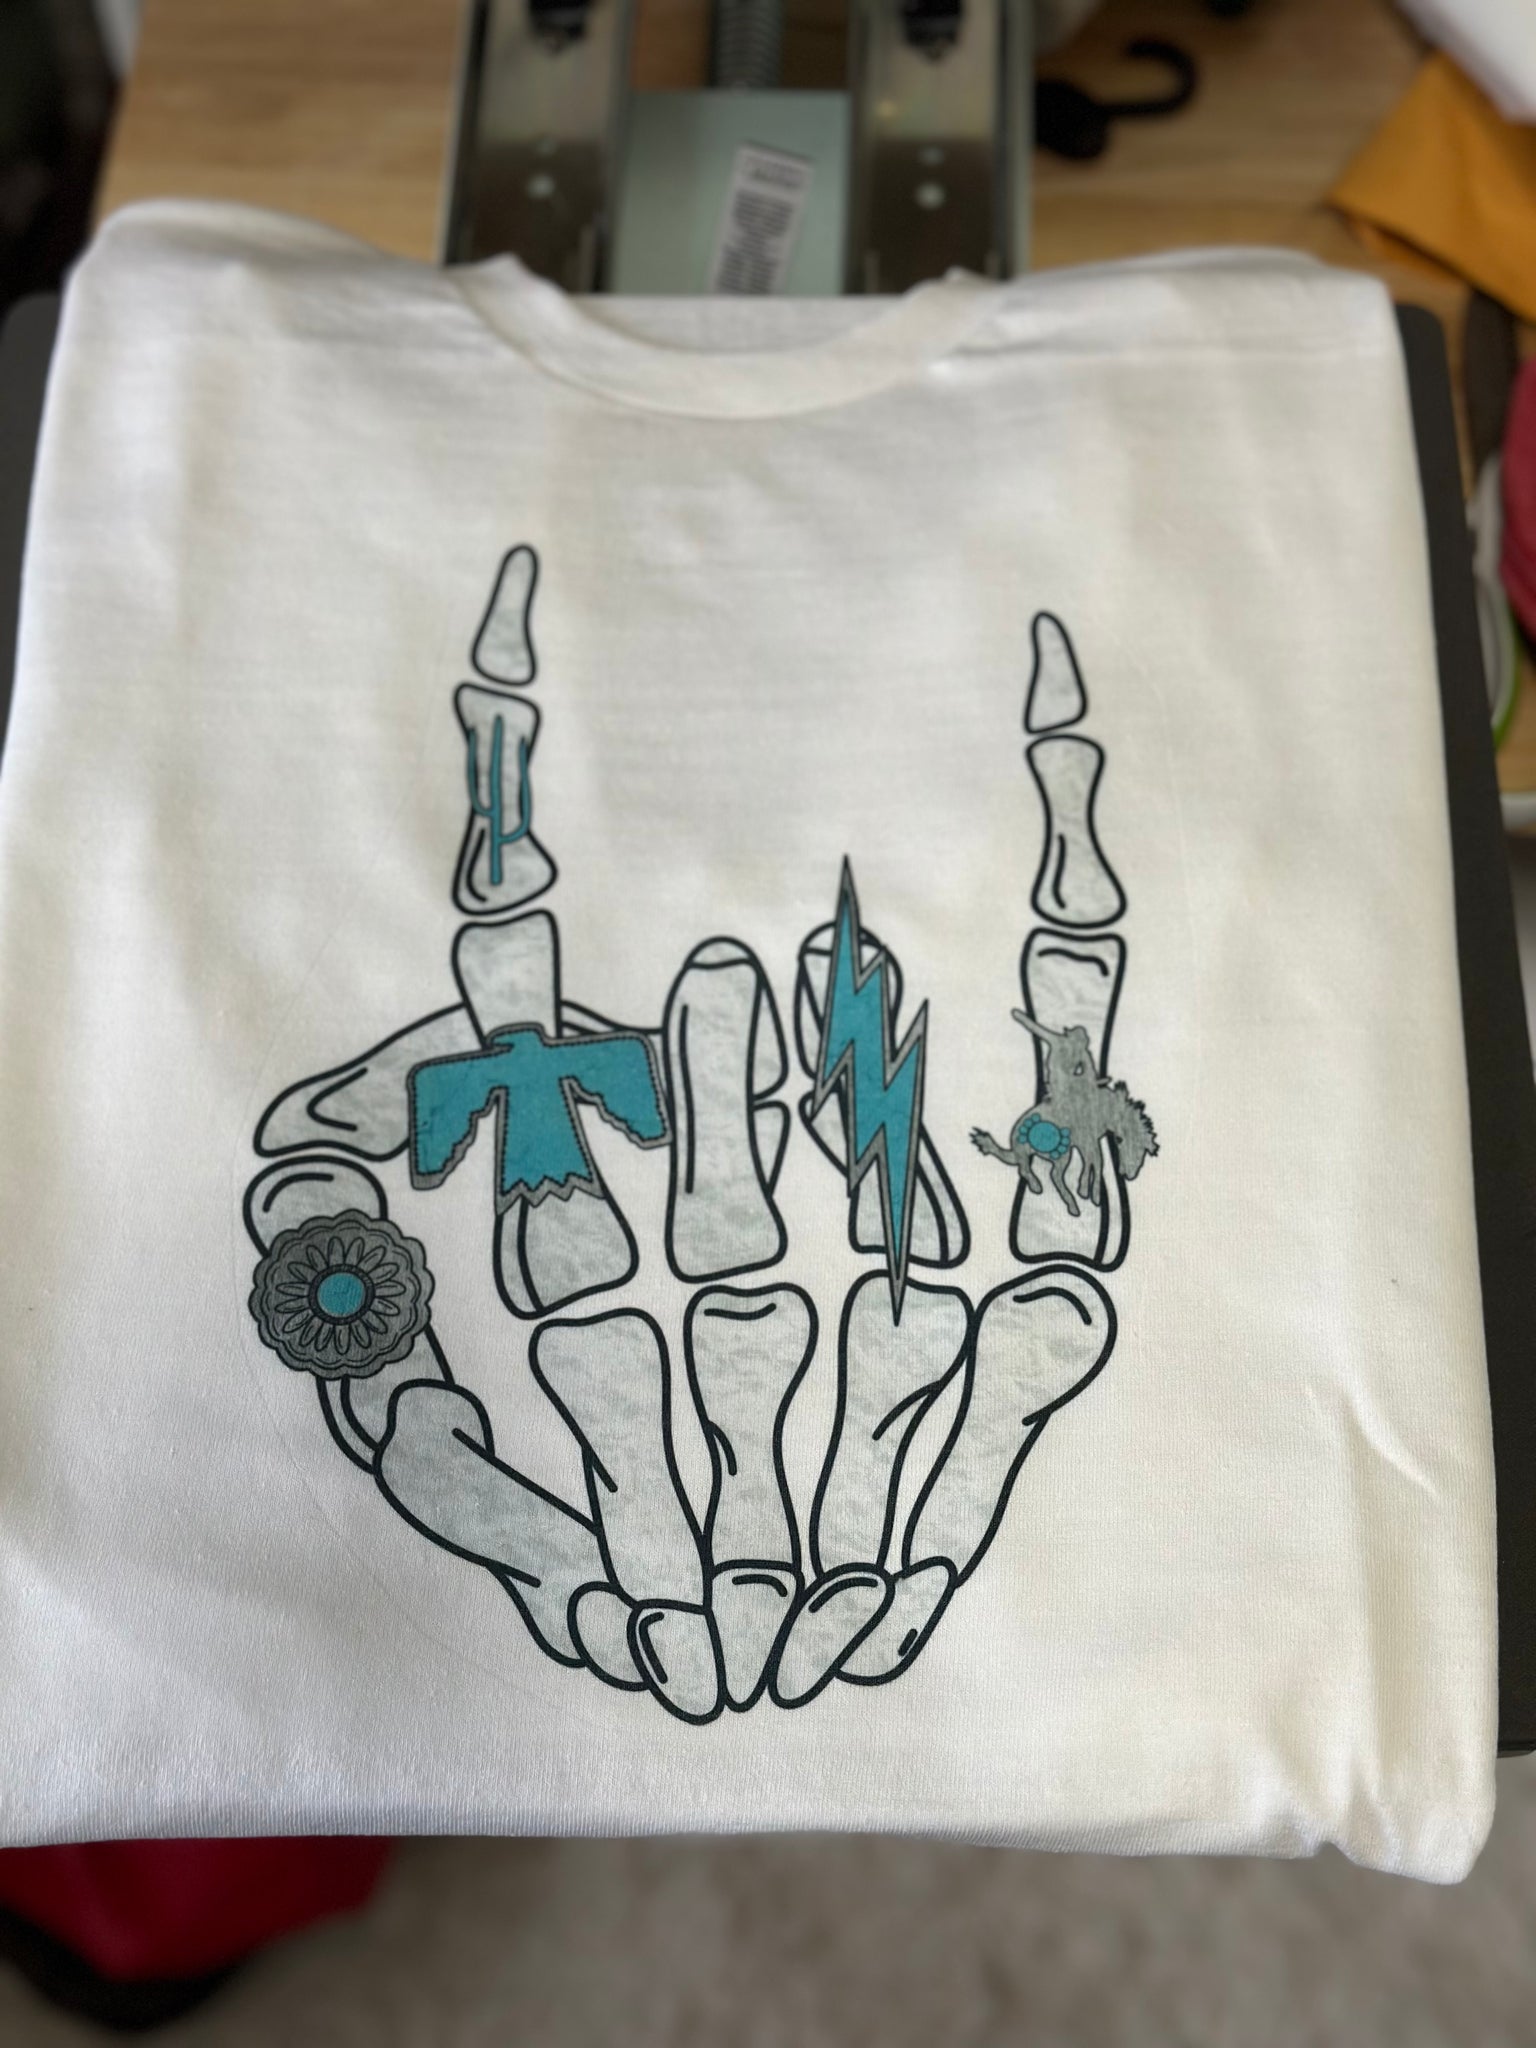 Turquoise skelly shirt